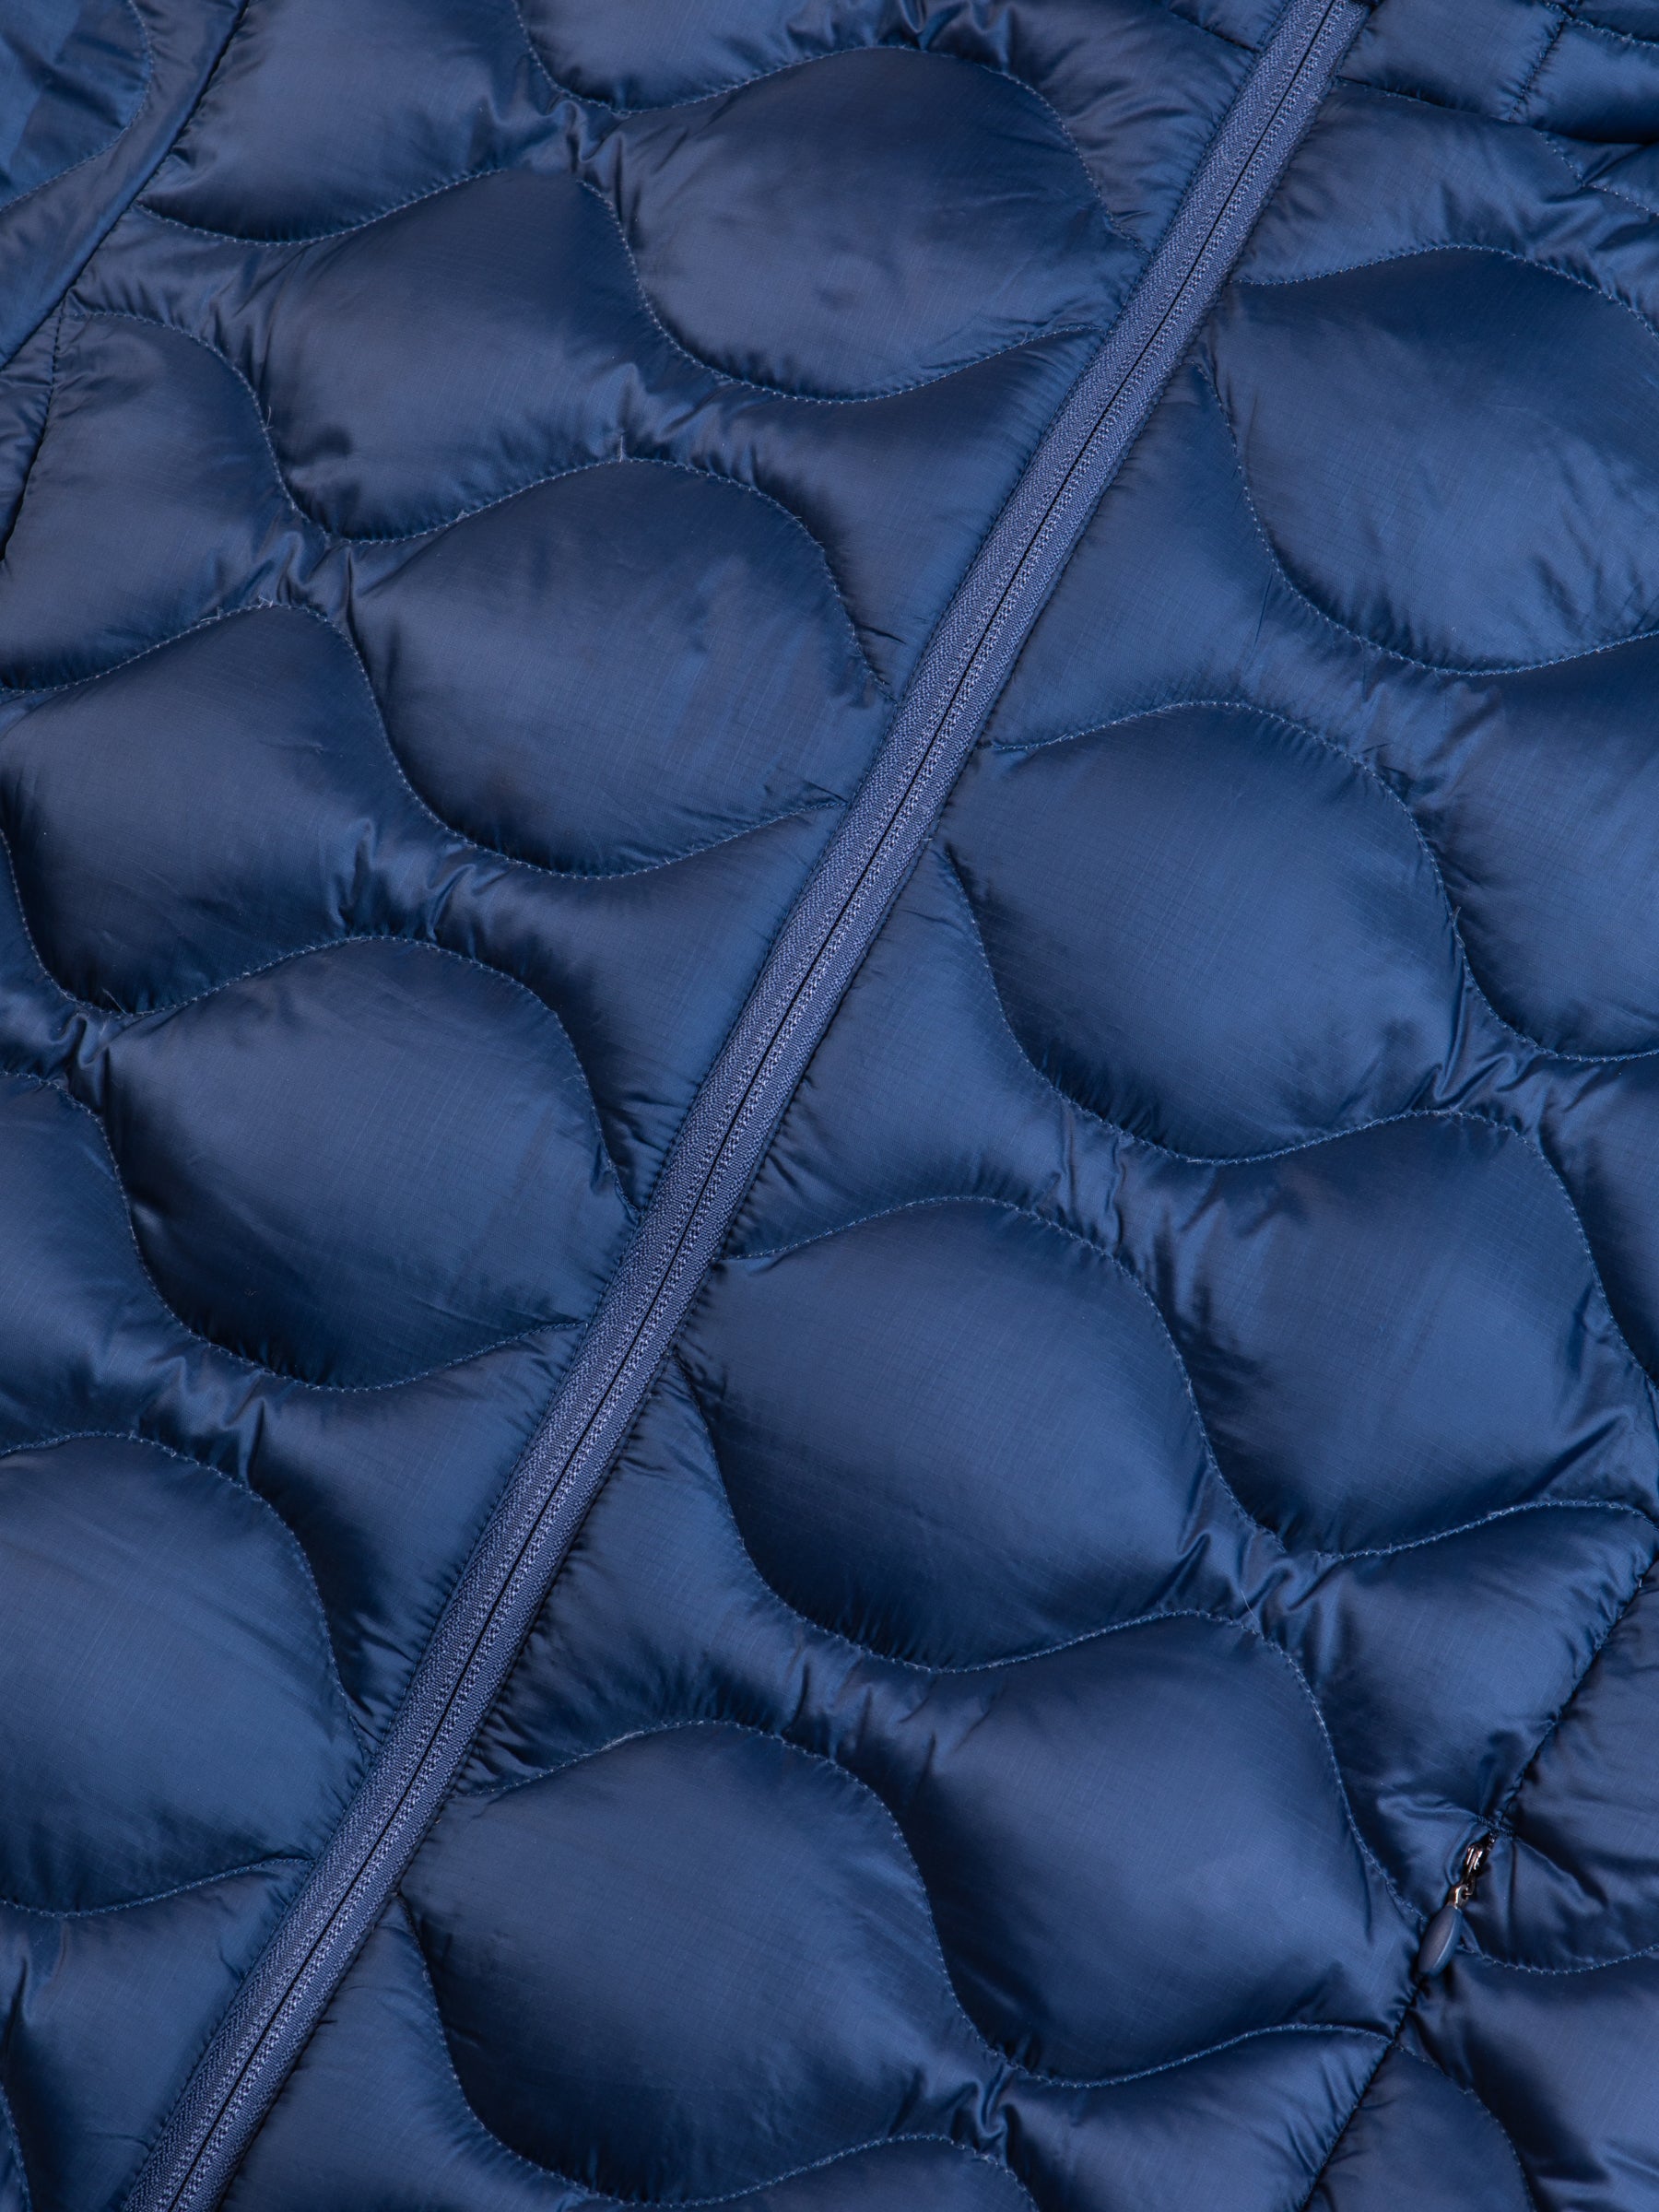 The material from a men's quilted down insulated jacket in a petrol blue colour.